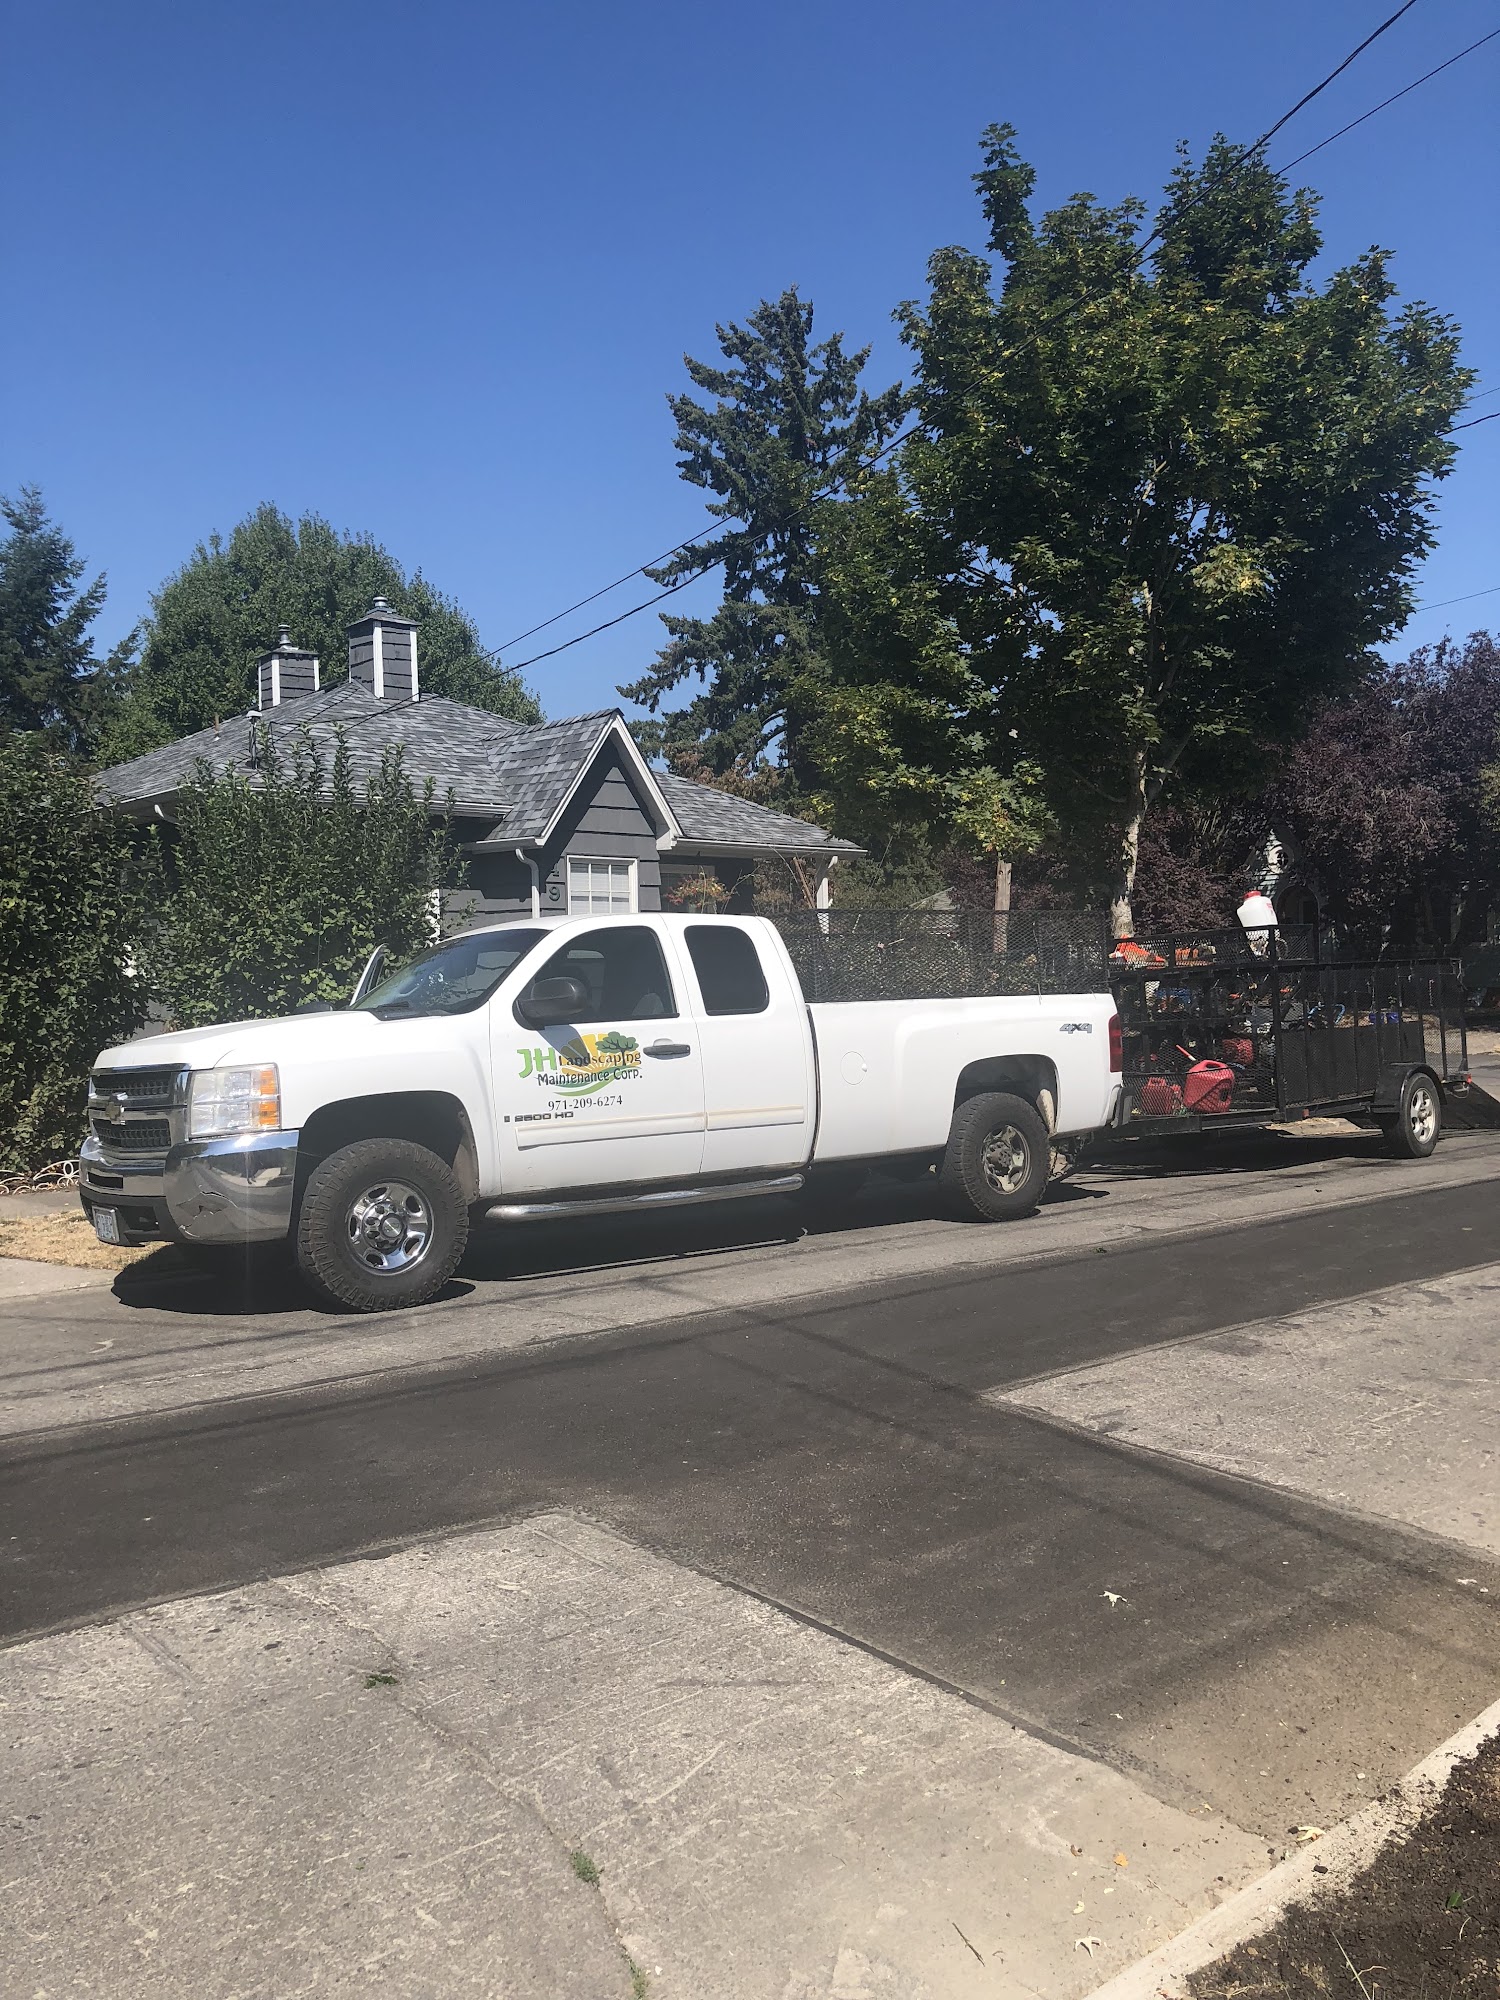 JH Landscaping Maintenance Corp. 541 S 10th St, Independence Oregon 97351